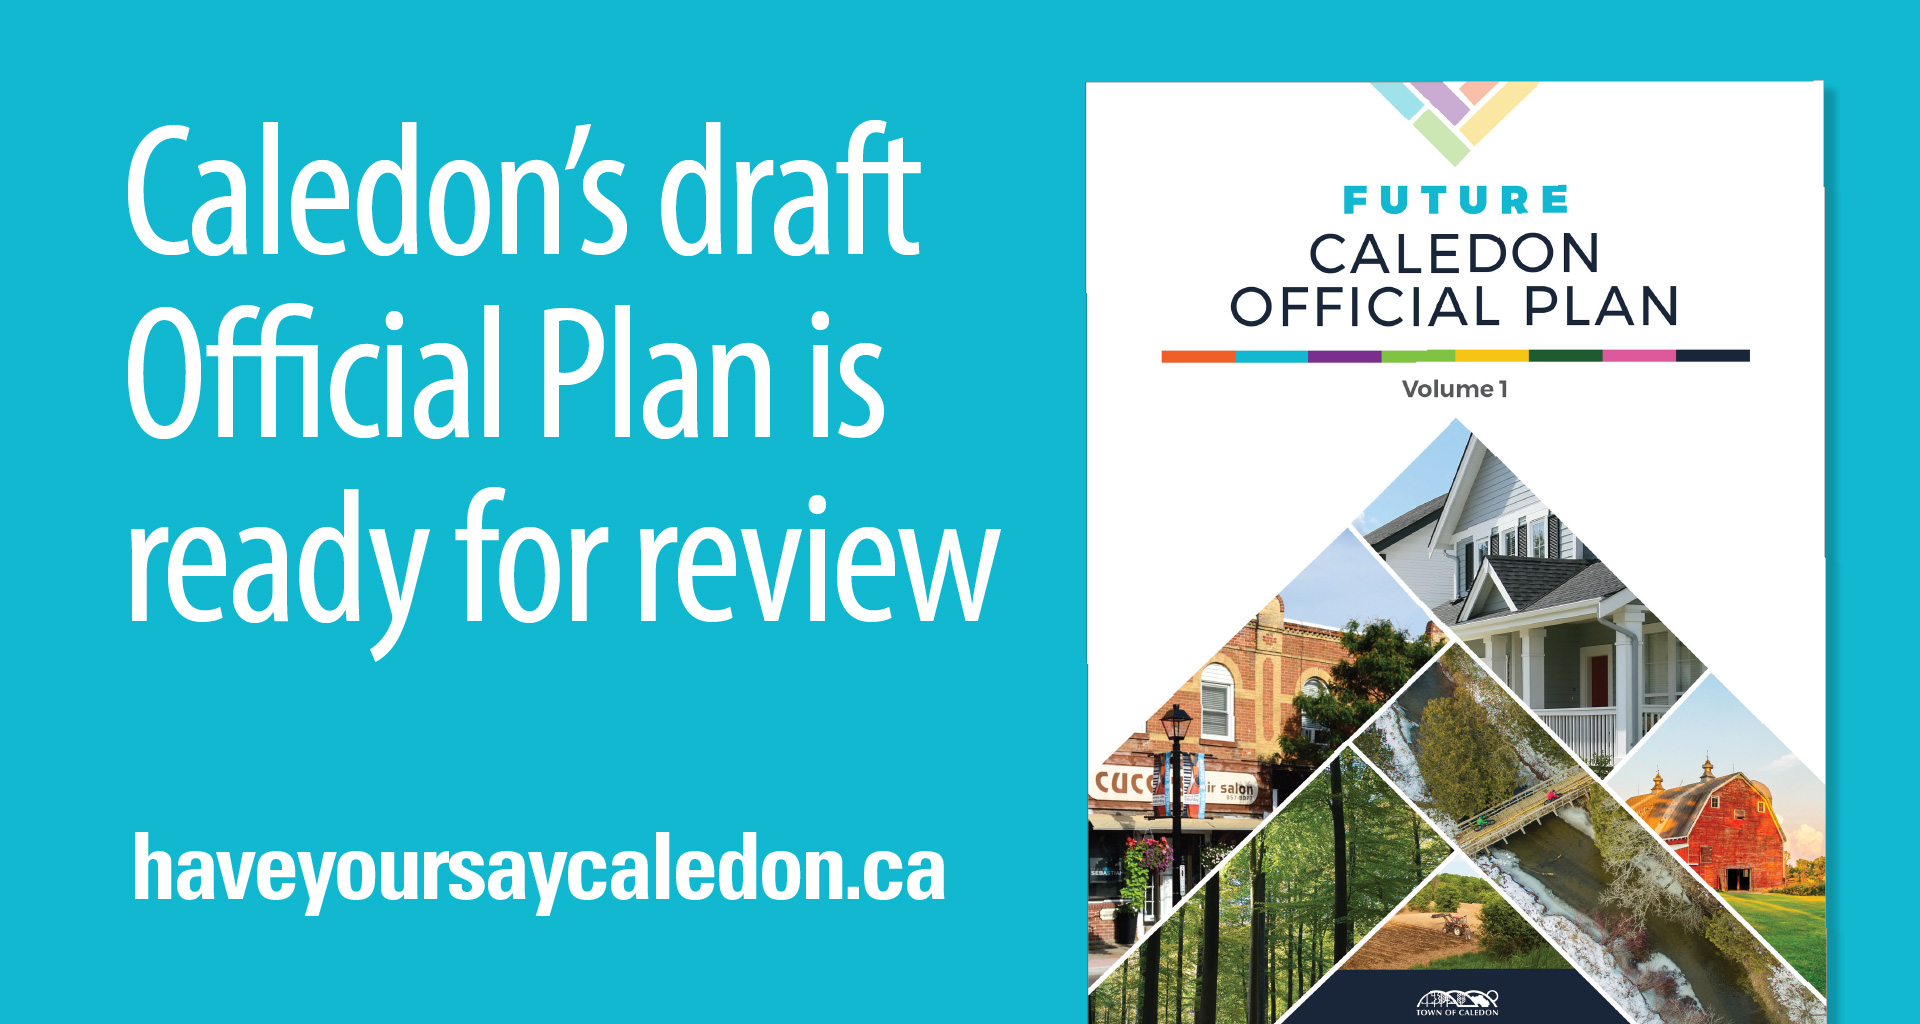 Caledon's draft Official Plan is ready for review